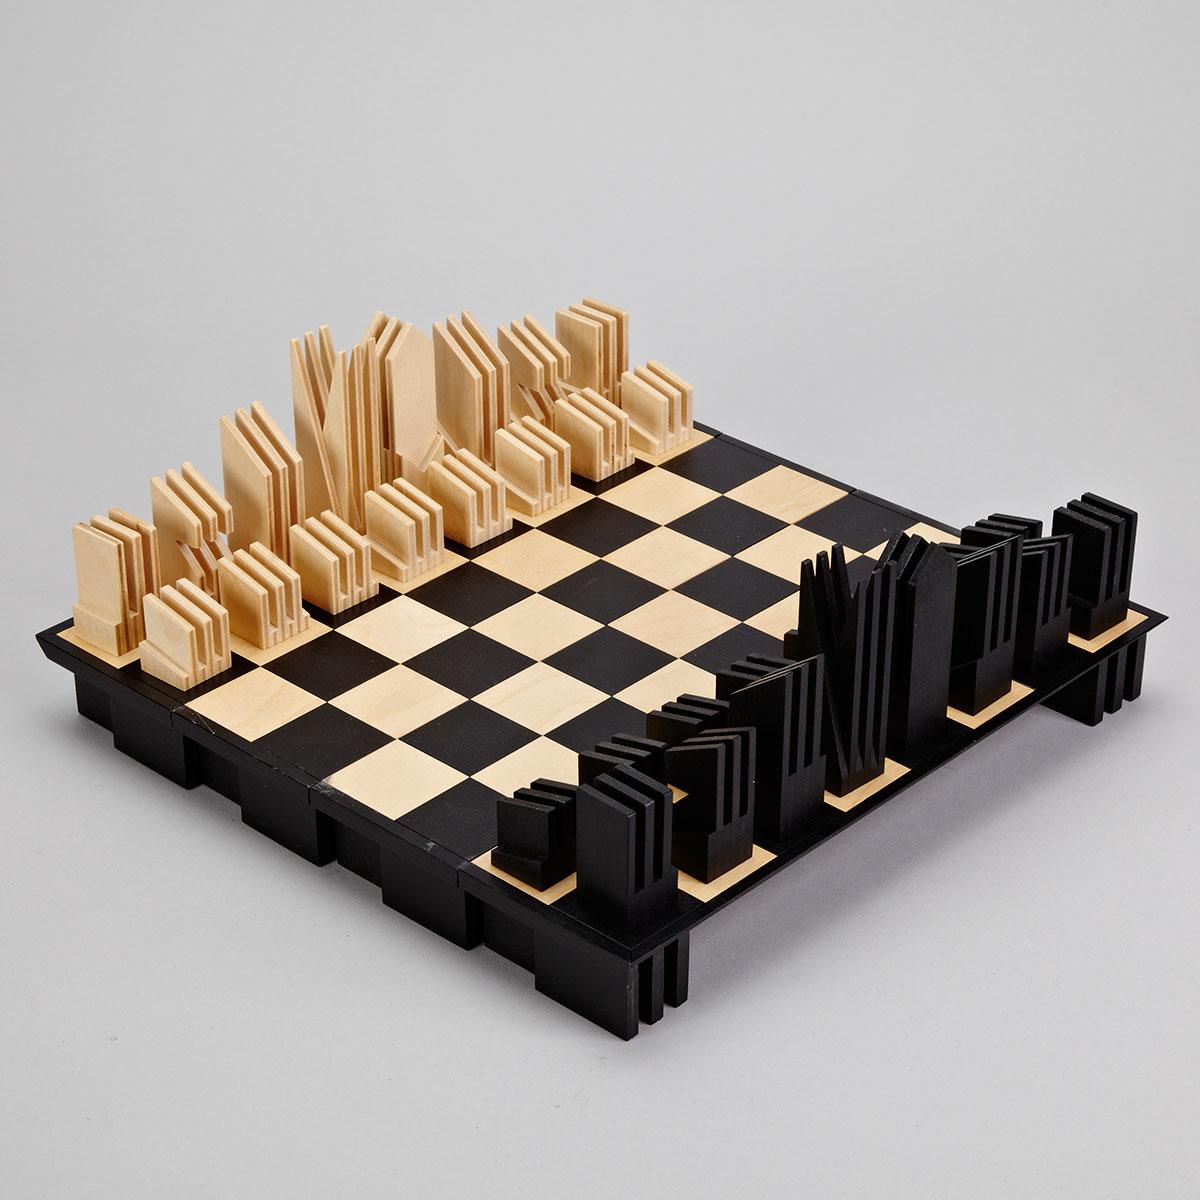 Contemporary Abstract Folding Wood Chess Set, Anne Hornef, late 20th century